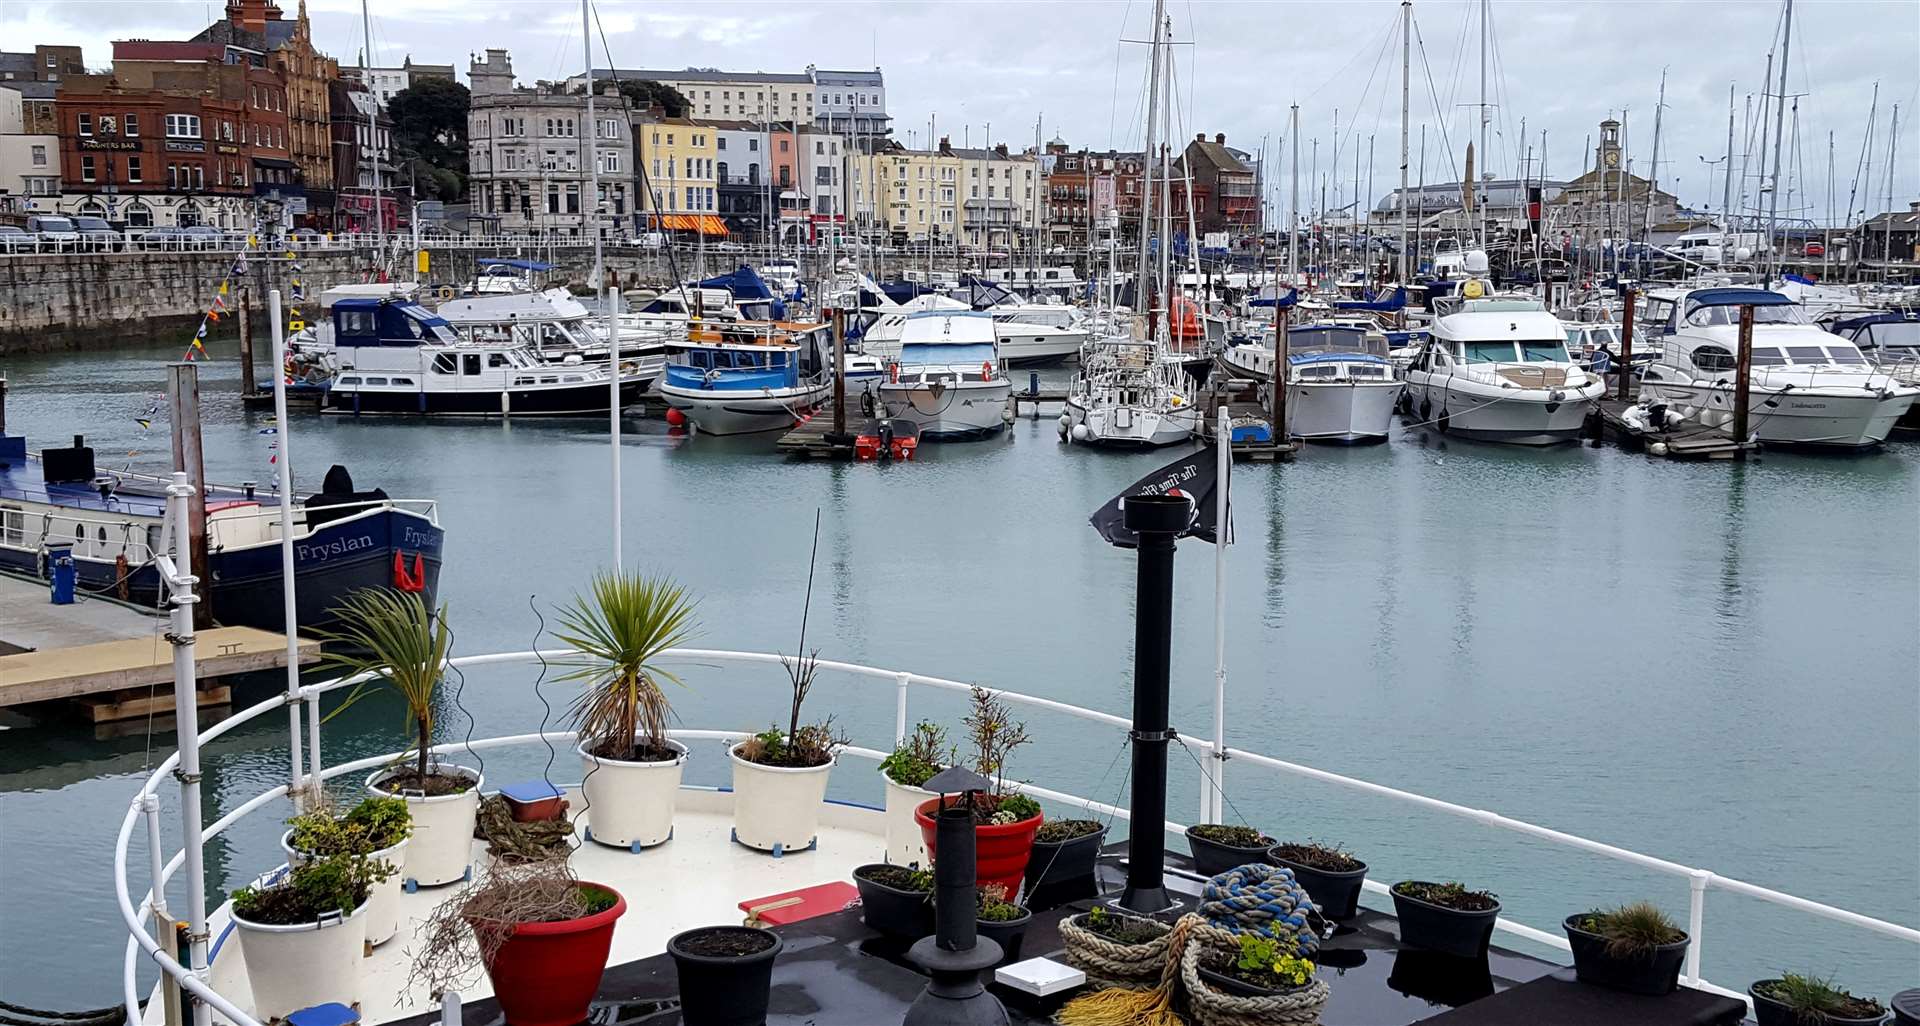 Ramsgate marina is overlooked by many bars and cafes (11648752)